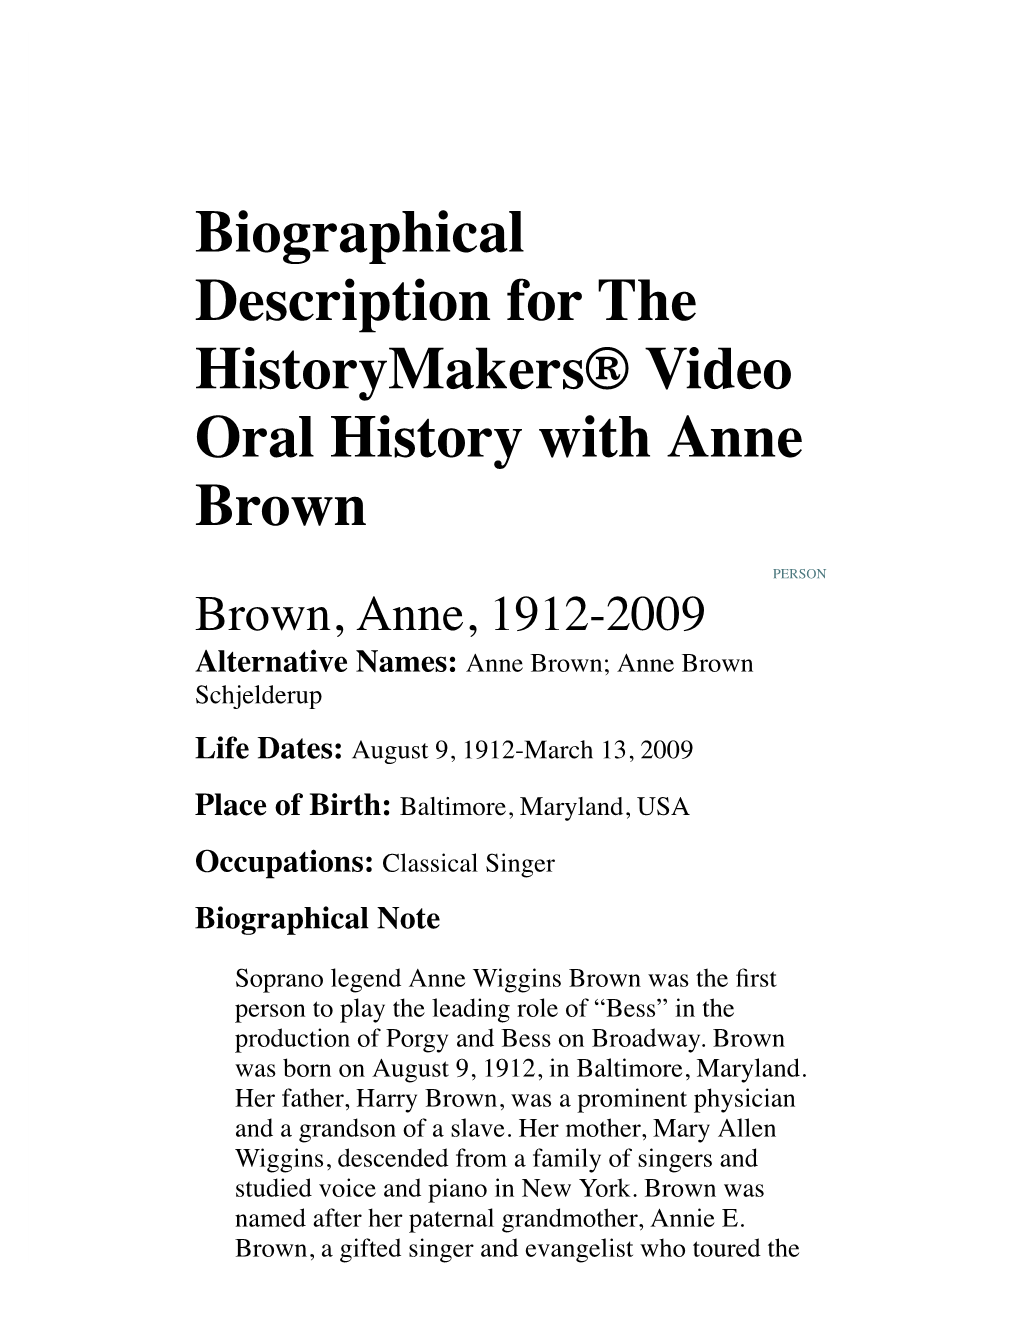 Biographical Description for the Historymakers® Video Oral History with Anne Brown